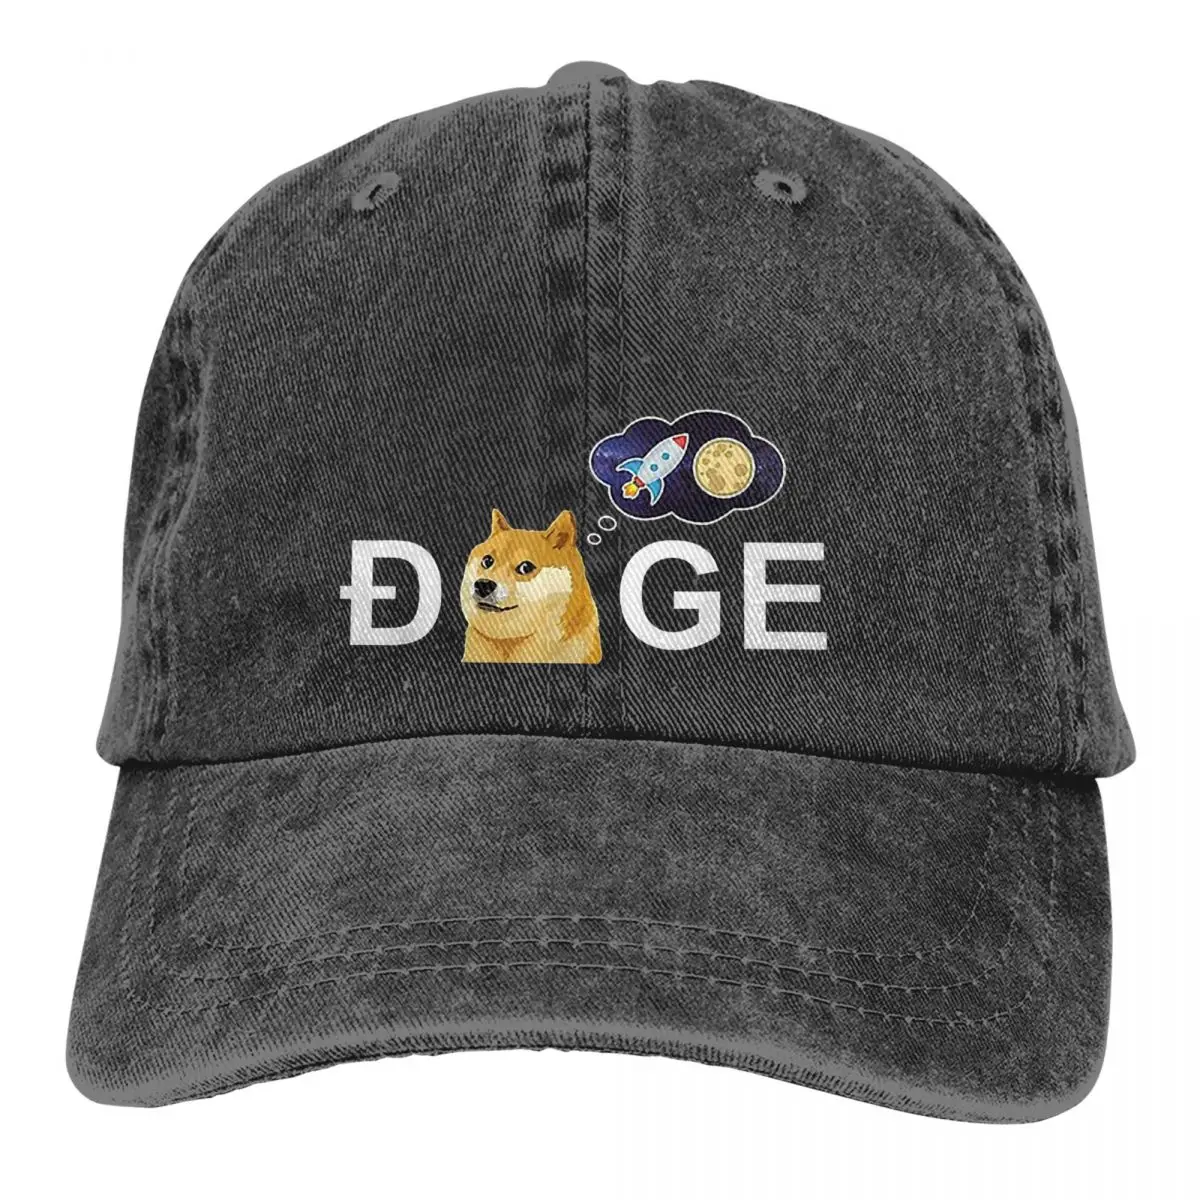 

Bitcoin Art Multicolor Hat Peaked Women's Cap Dogecoin Doge HODL To The Moon Crypto Meme Personalized Visor Protection Hats